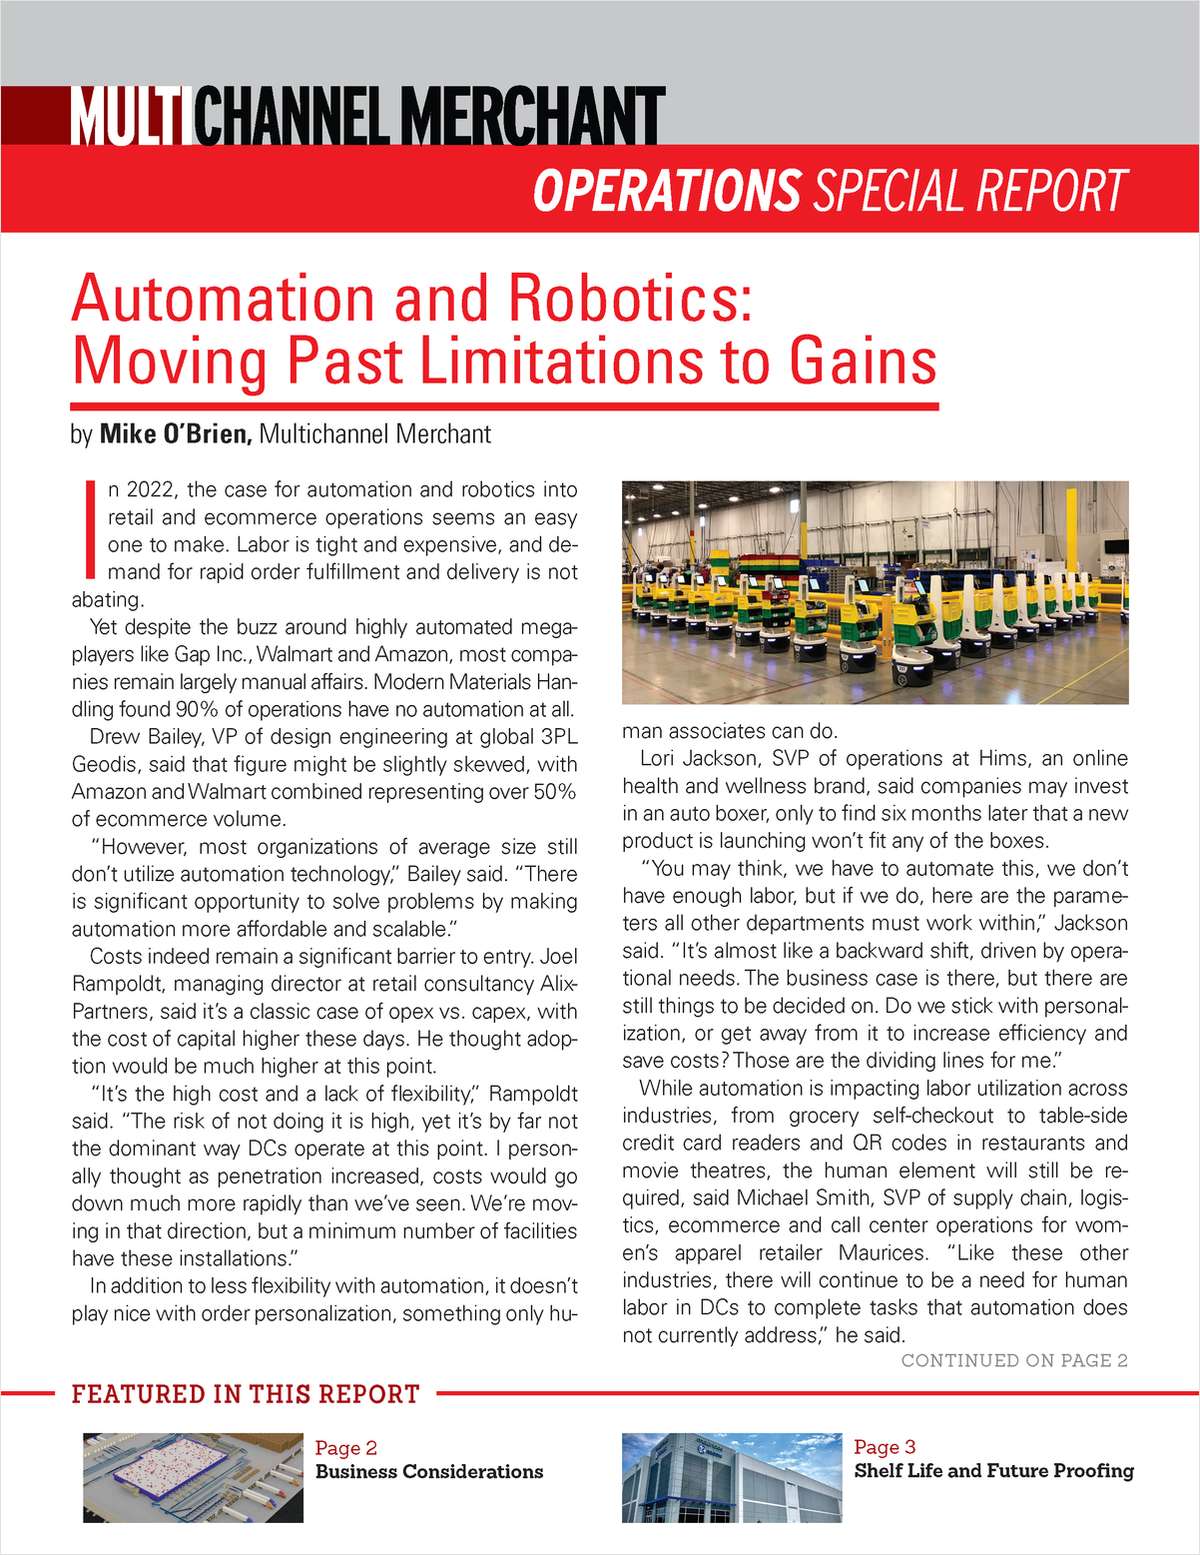 Automation and Robotics: Moving Past Limitations to Gains